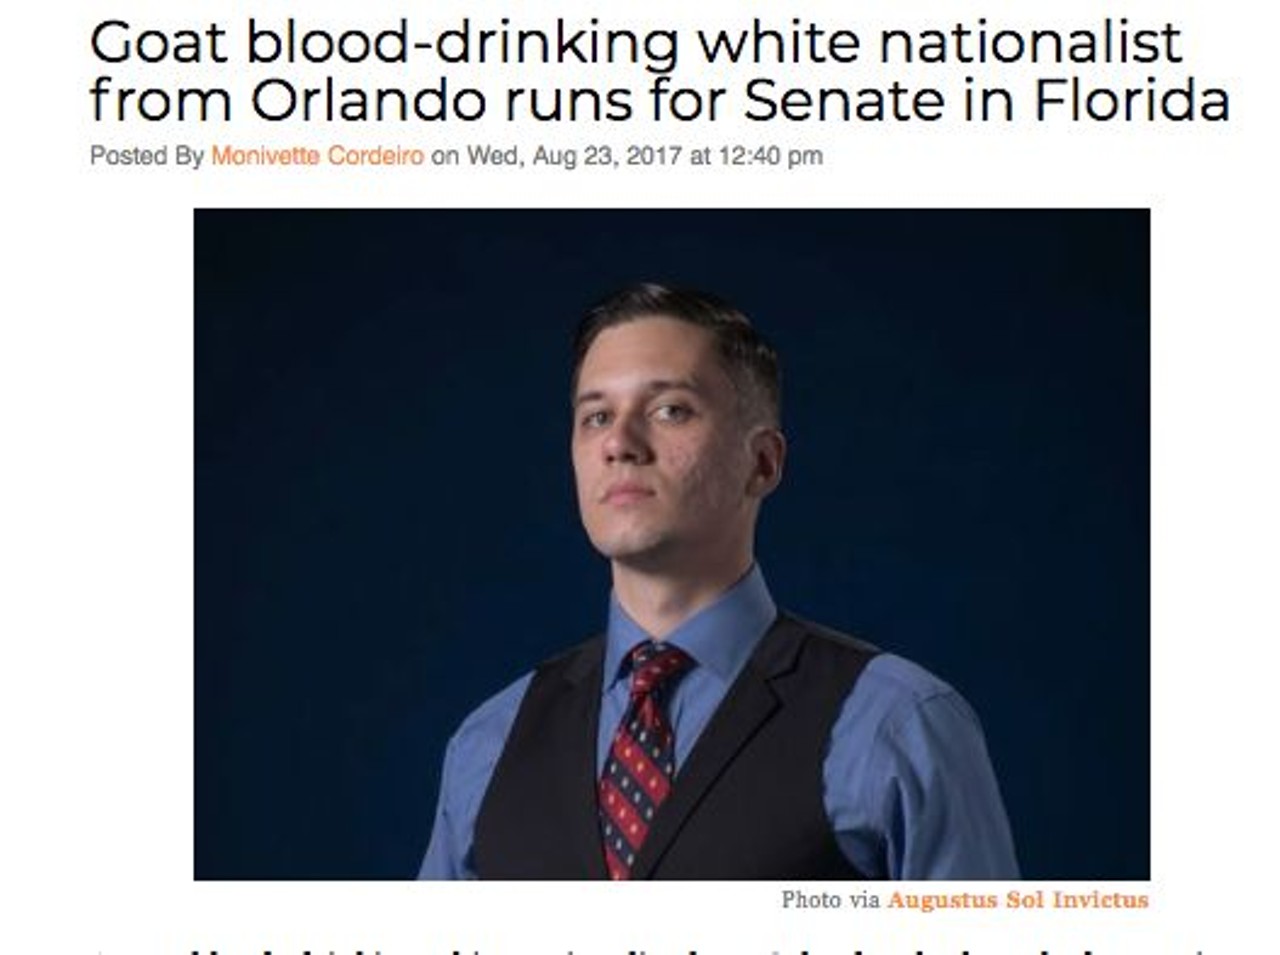 A goat blood&#150;drinking white nationalist from Orlando who launched a previous failed bid as a Libertarian says he's running again for U.S. Senate, but this time as a Republican.  Read more